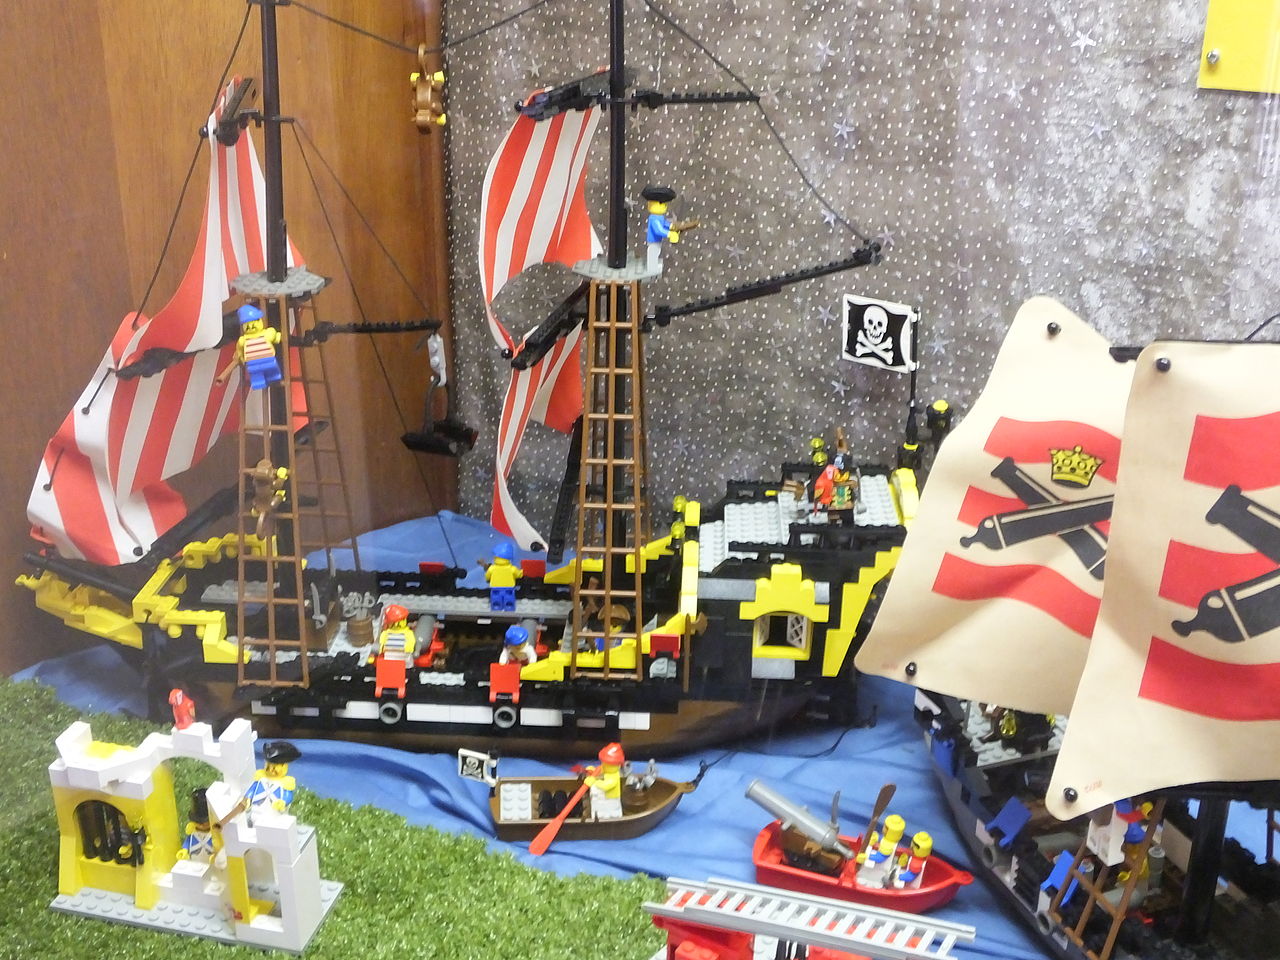 File:JLL Childhood Collection- Display of Lego- Pirate Lego 2760.JPG -  Wikimedia Commons